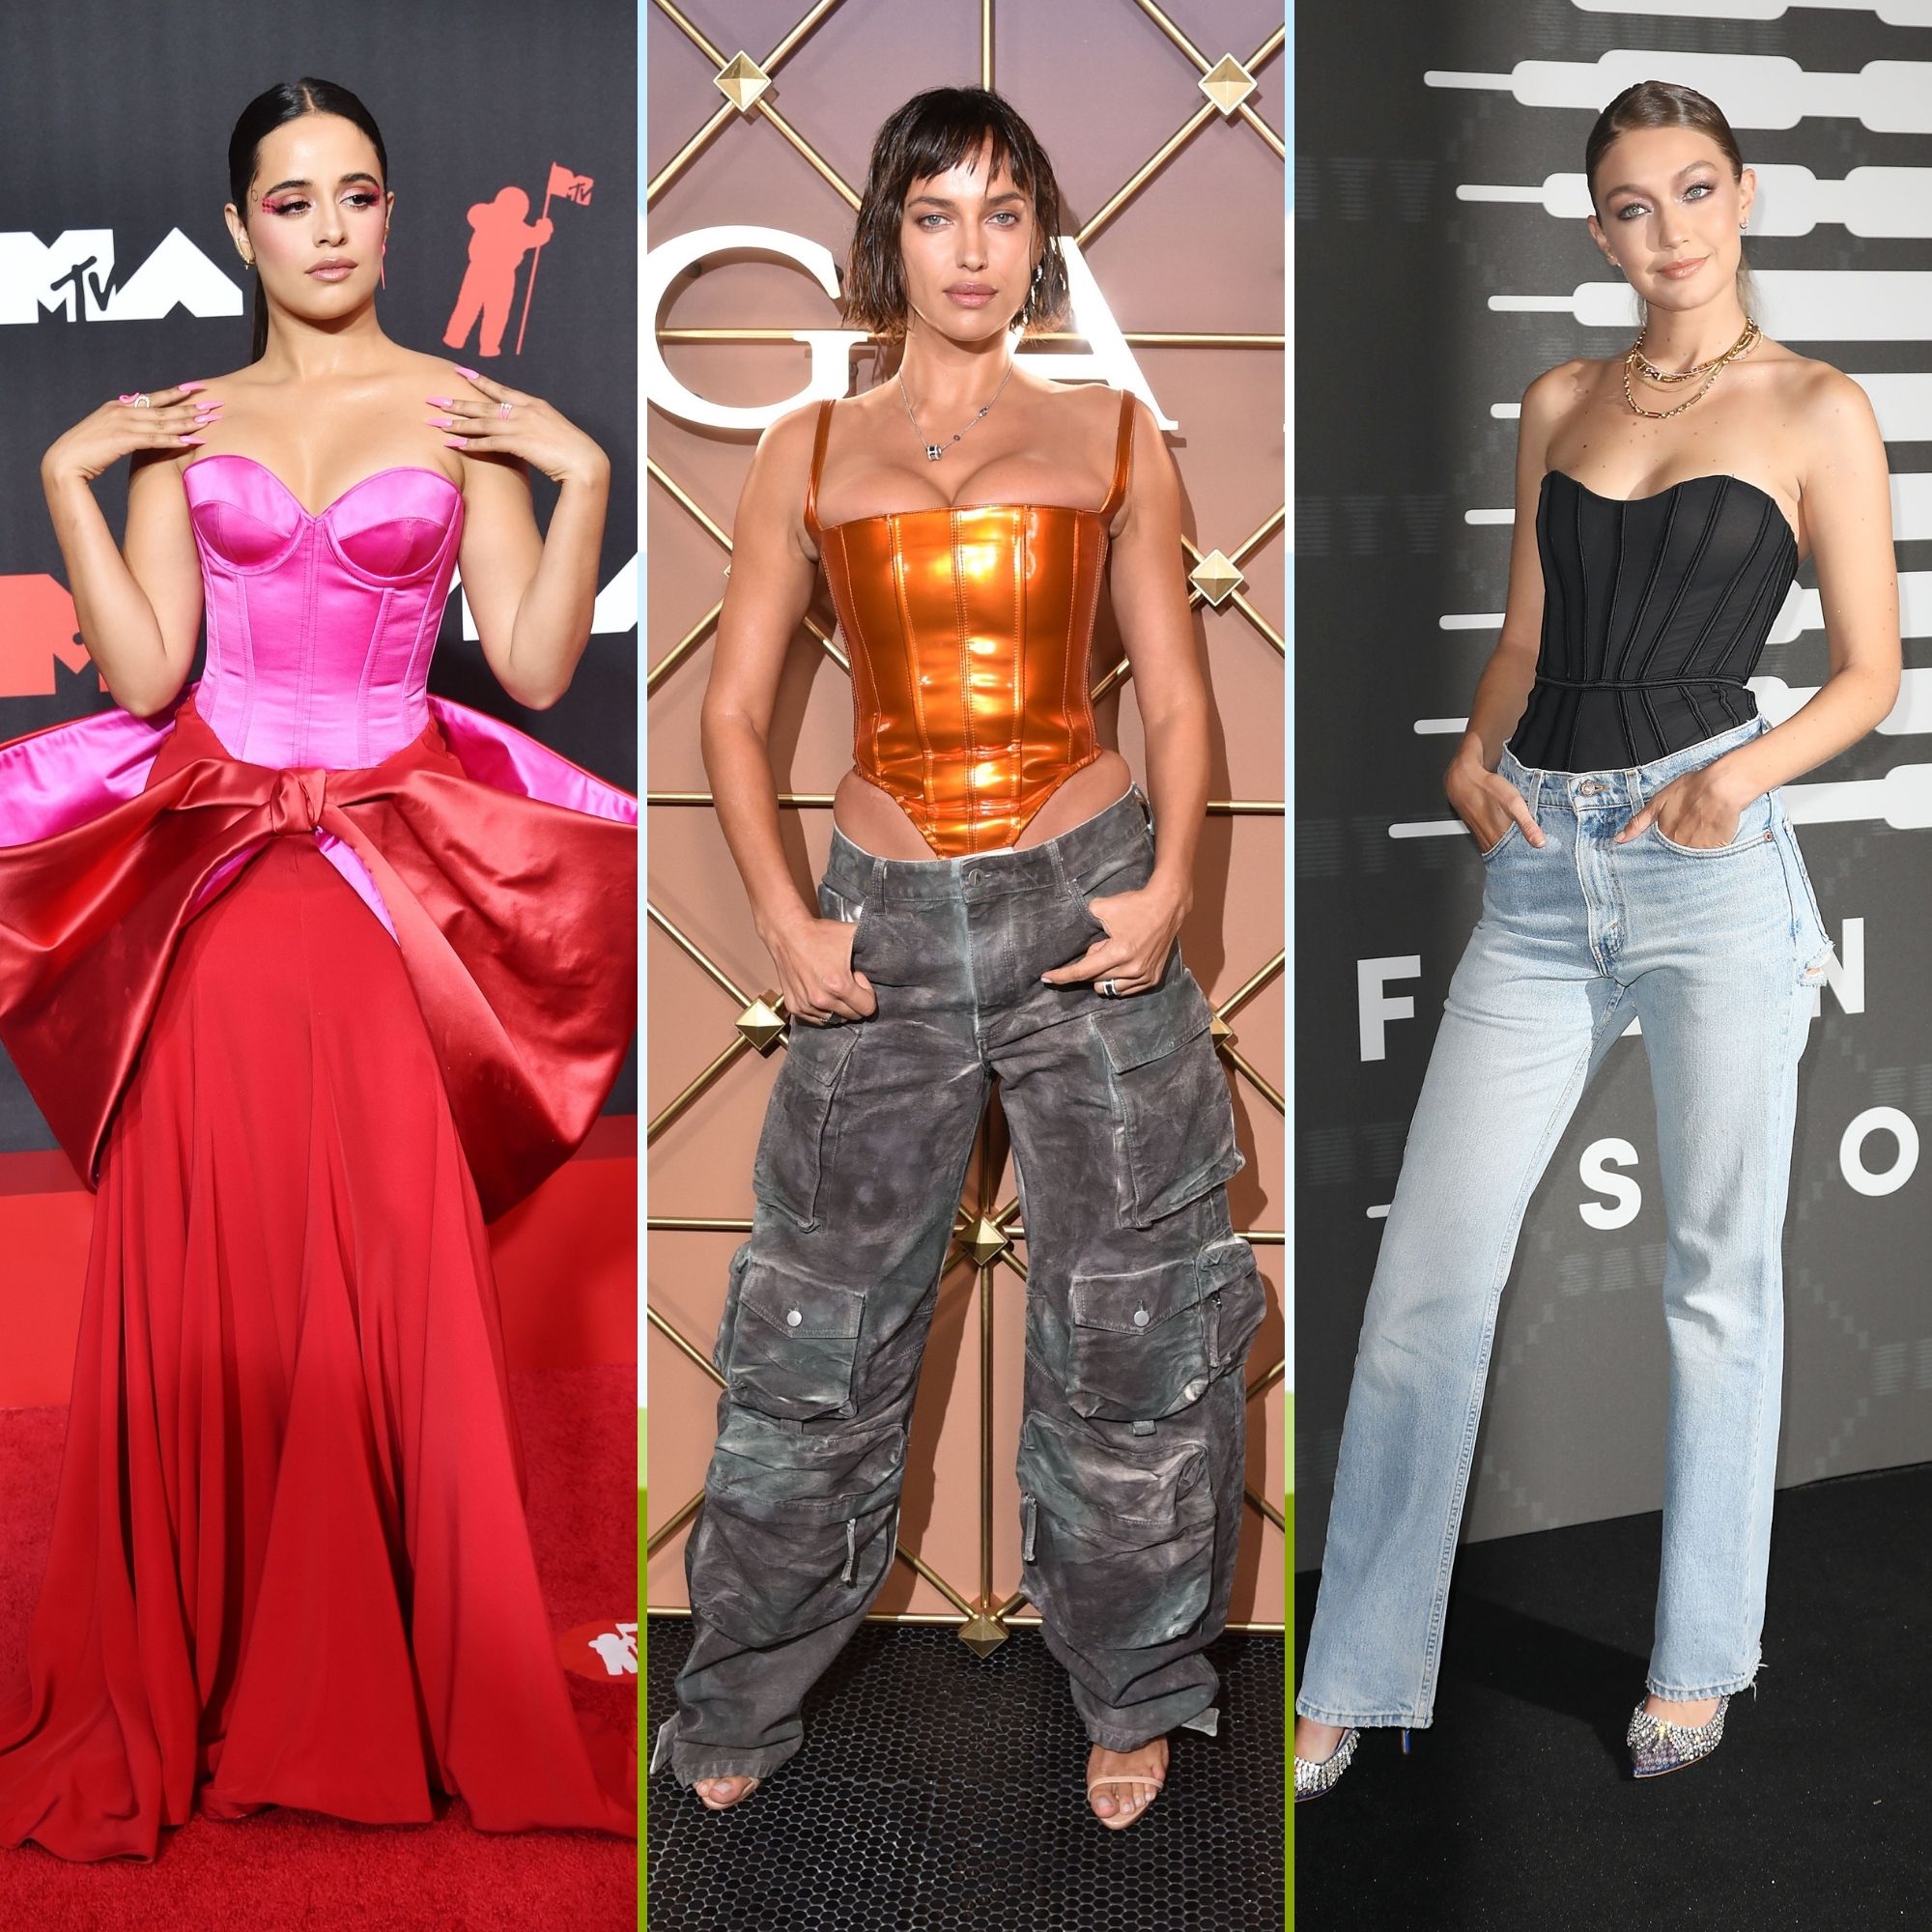 11 Corset Top Outfit Ideas, According To These Stylish Celebrities